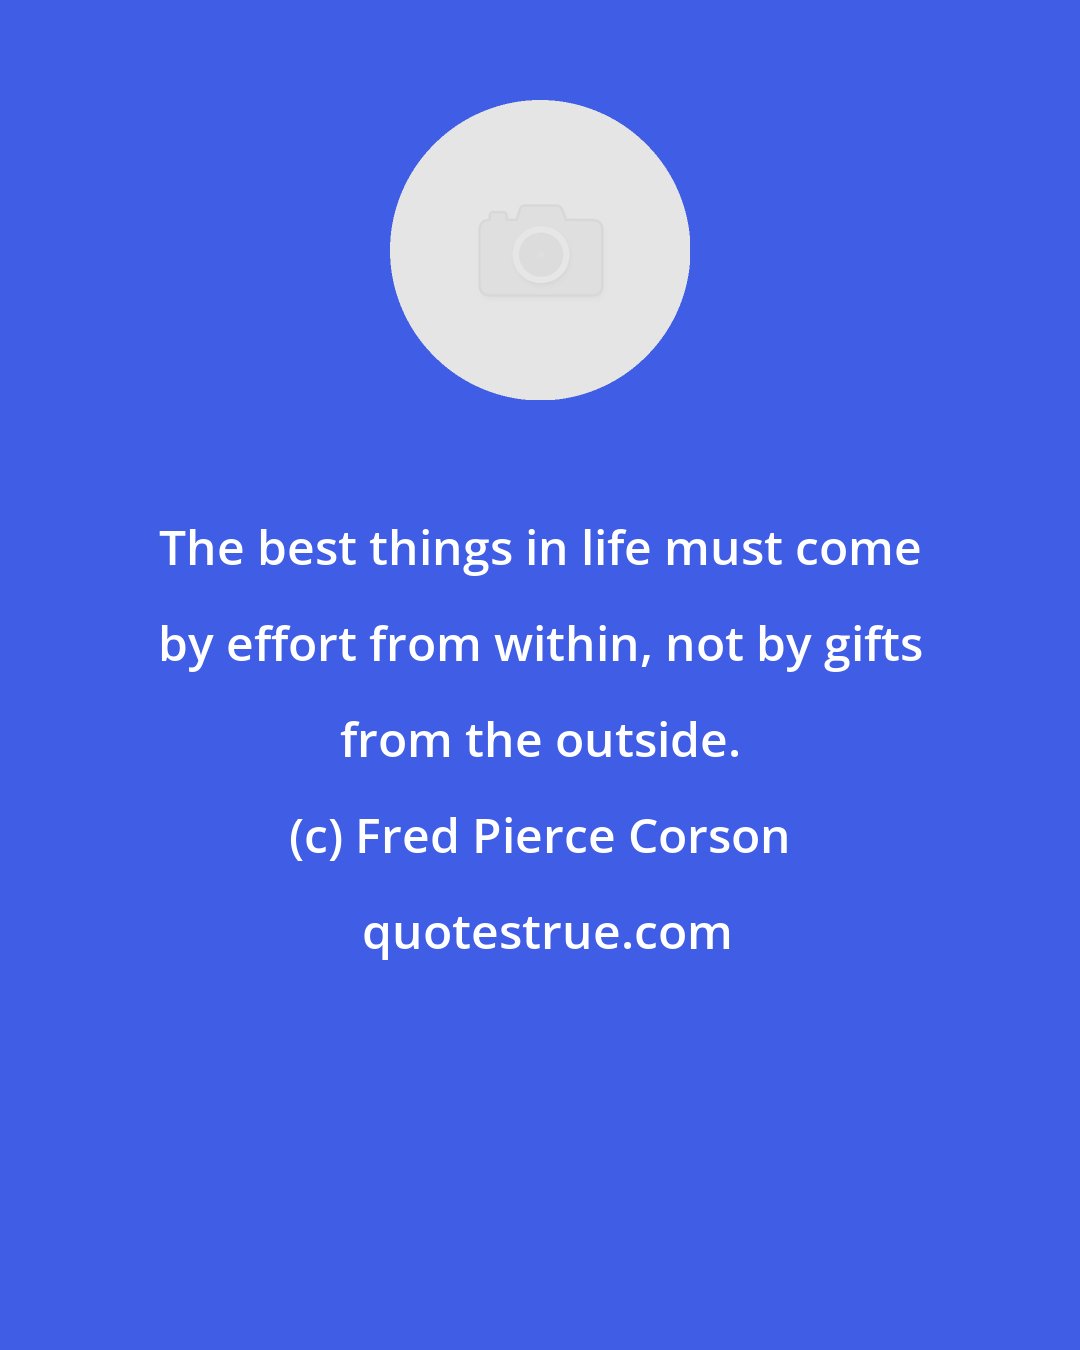 Fred Pierce Corson: The best things in life must come by effort from within, not by gifts from the outside.